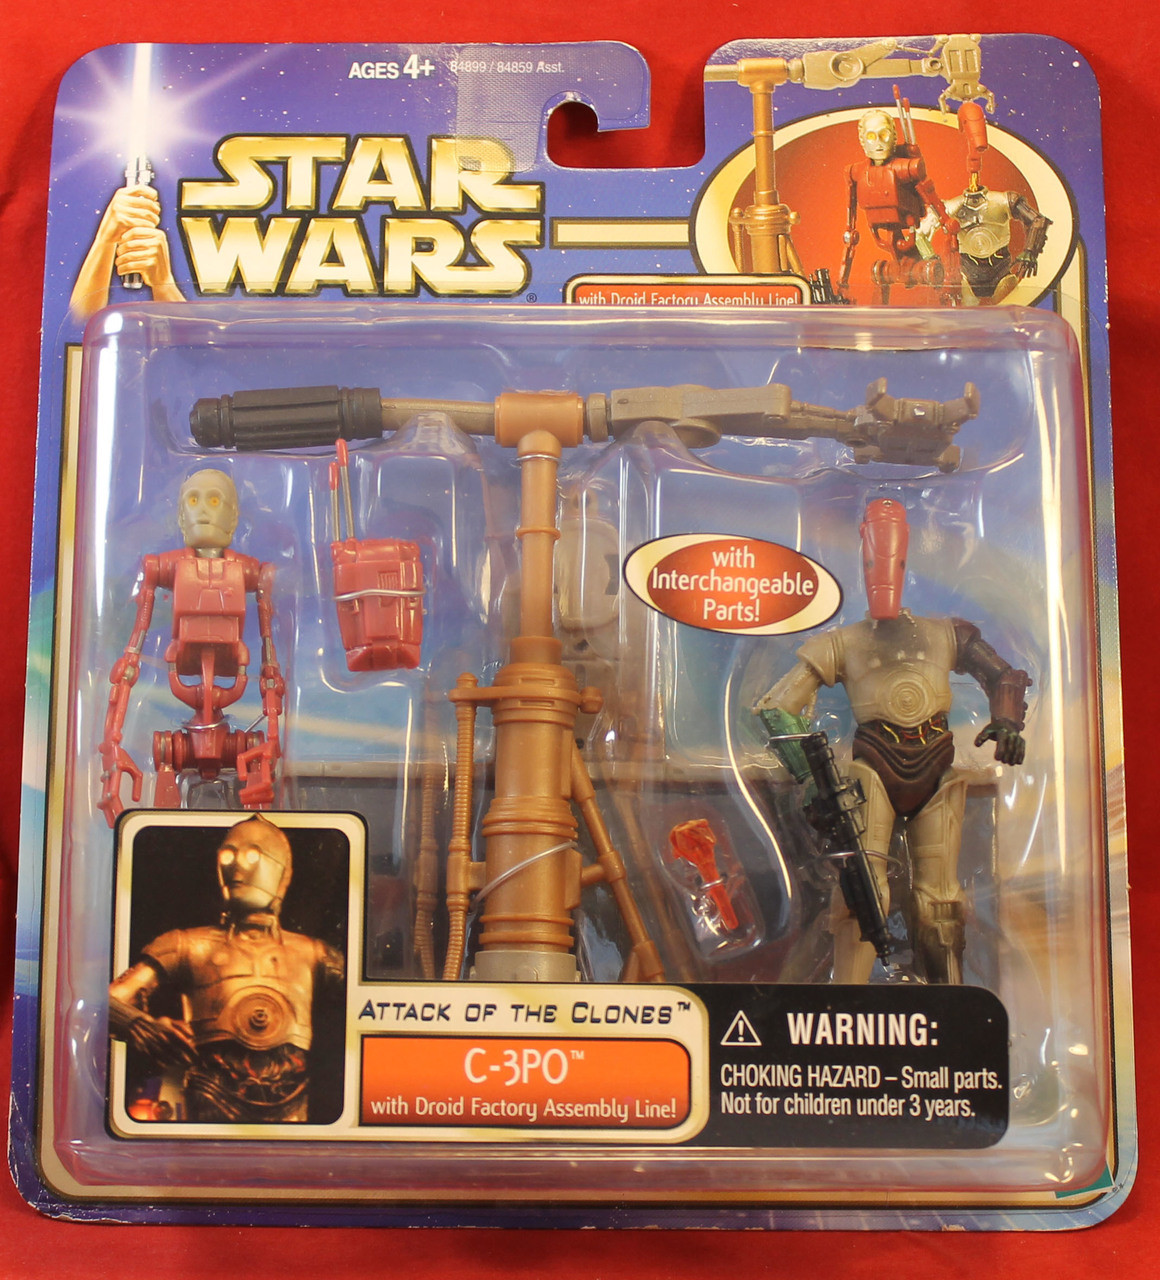 Star Wars Attack of the Clones AOTC Deluxe C-3PO Droid Factory Assembly Line